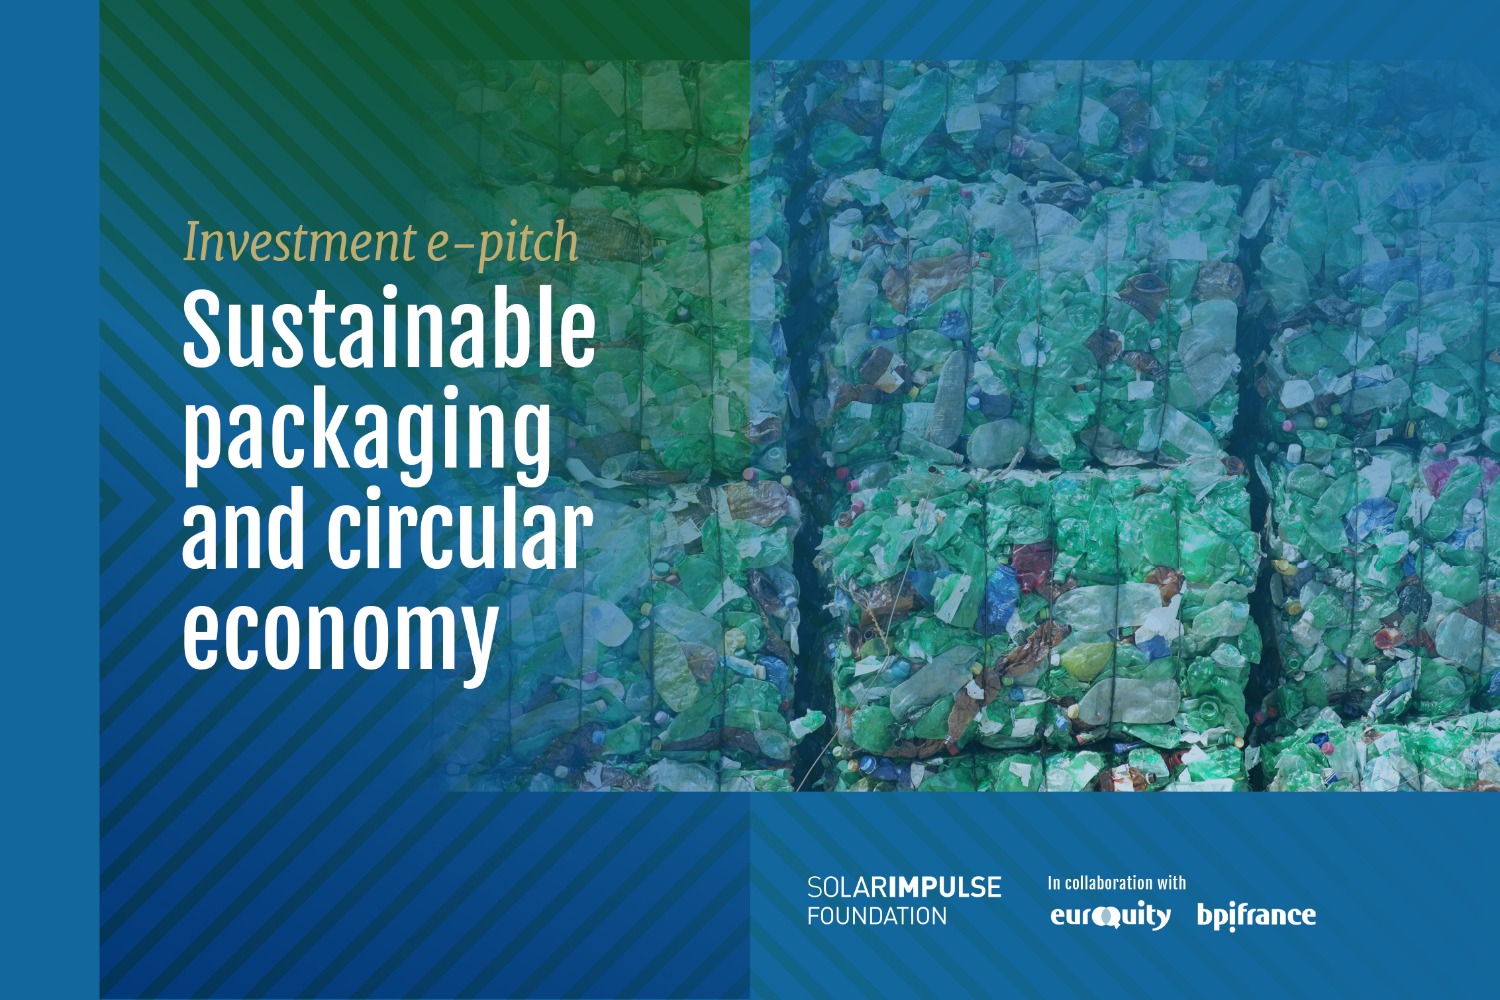 E-Pitch Solar Impulse Investment - "Sustainable packaging & circular economy" 